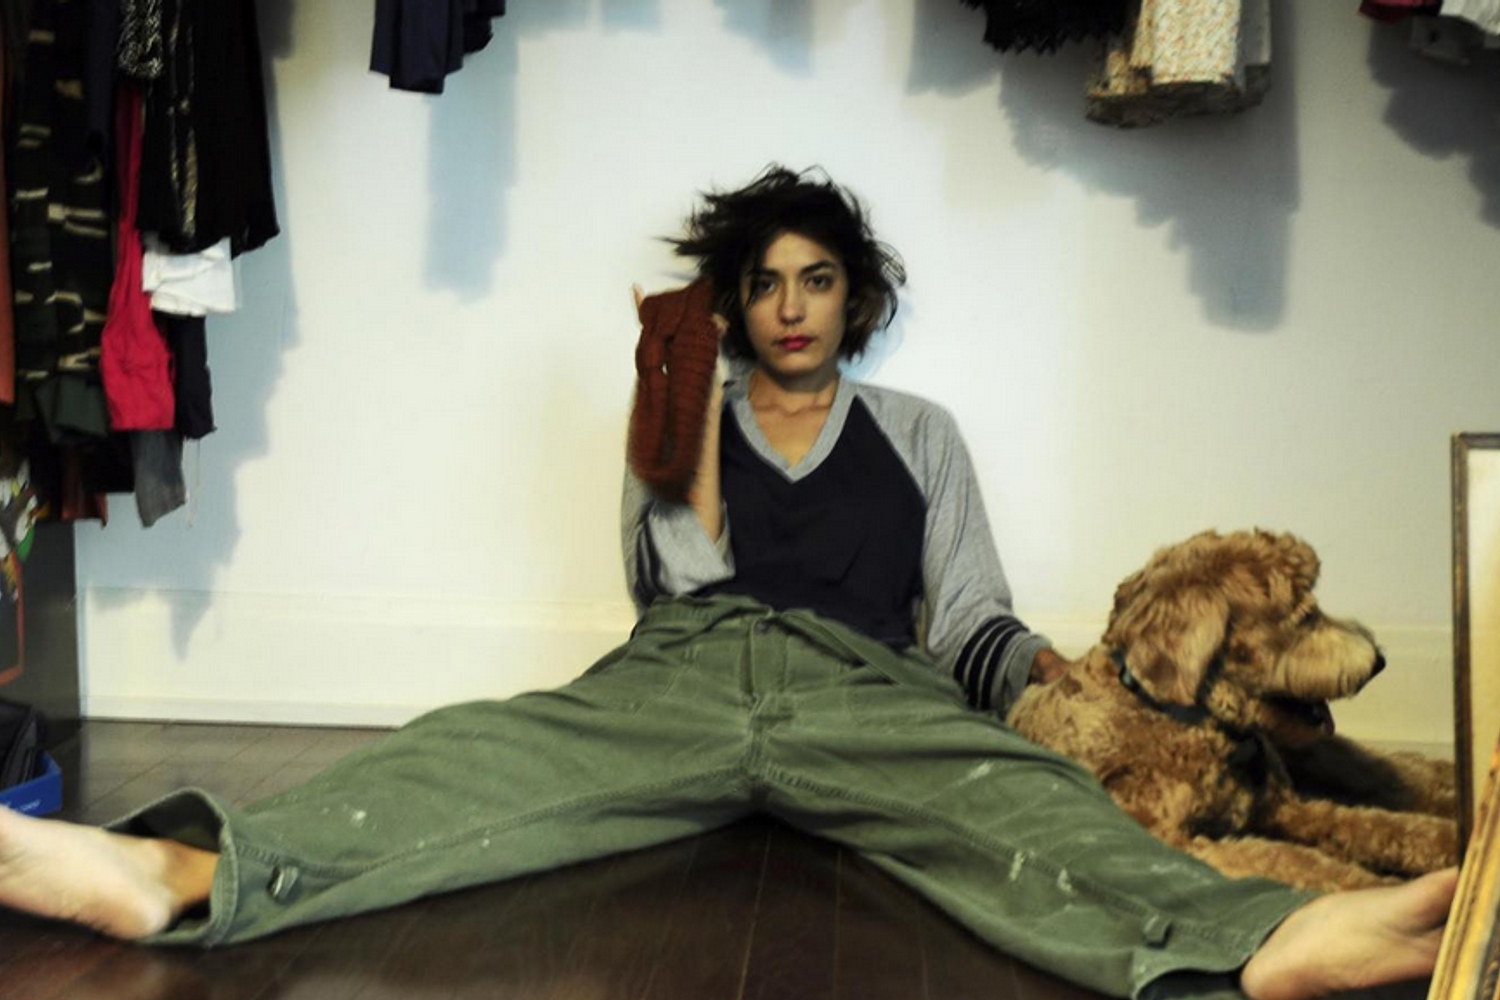 Warpaint’s Jenny Lee Lindberg starts solo project jennylee, announces debut album ‘right on!’